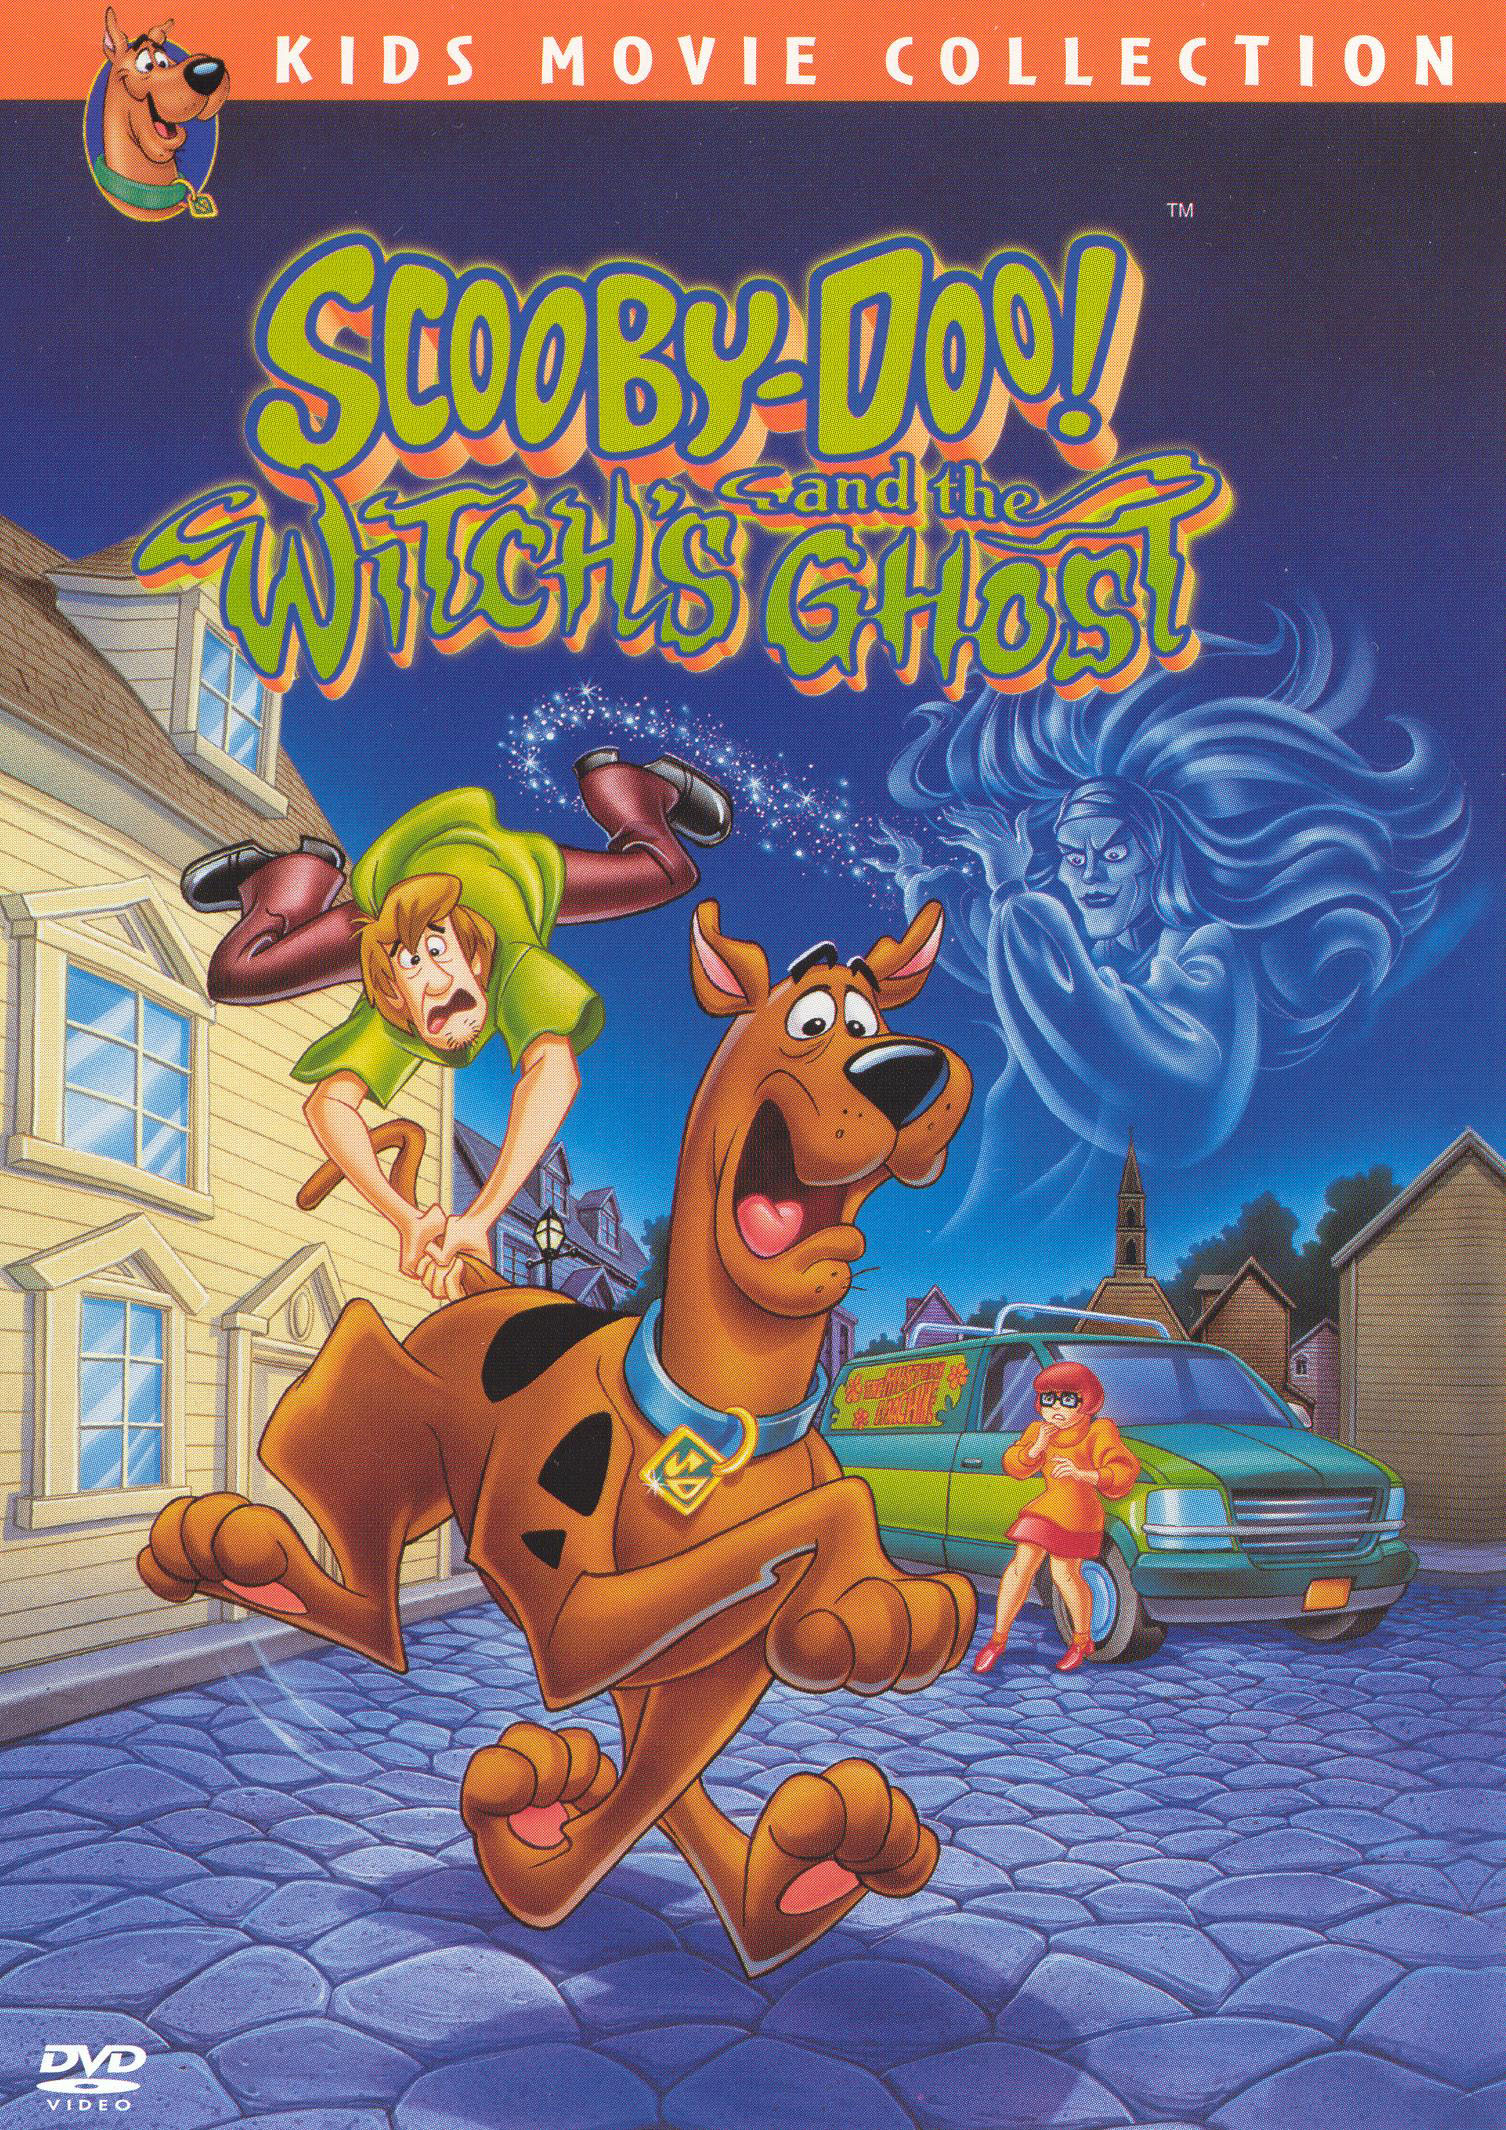 Scooby-Doo! and the Witch's Ghost [DVD] [1999] - Best Buy